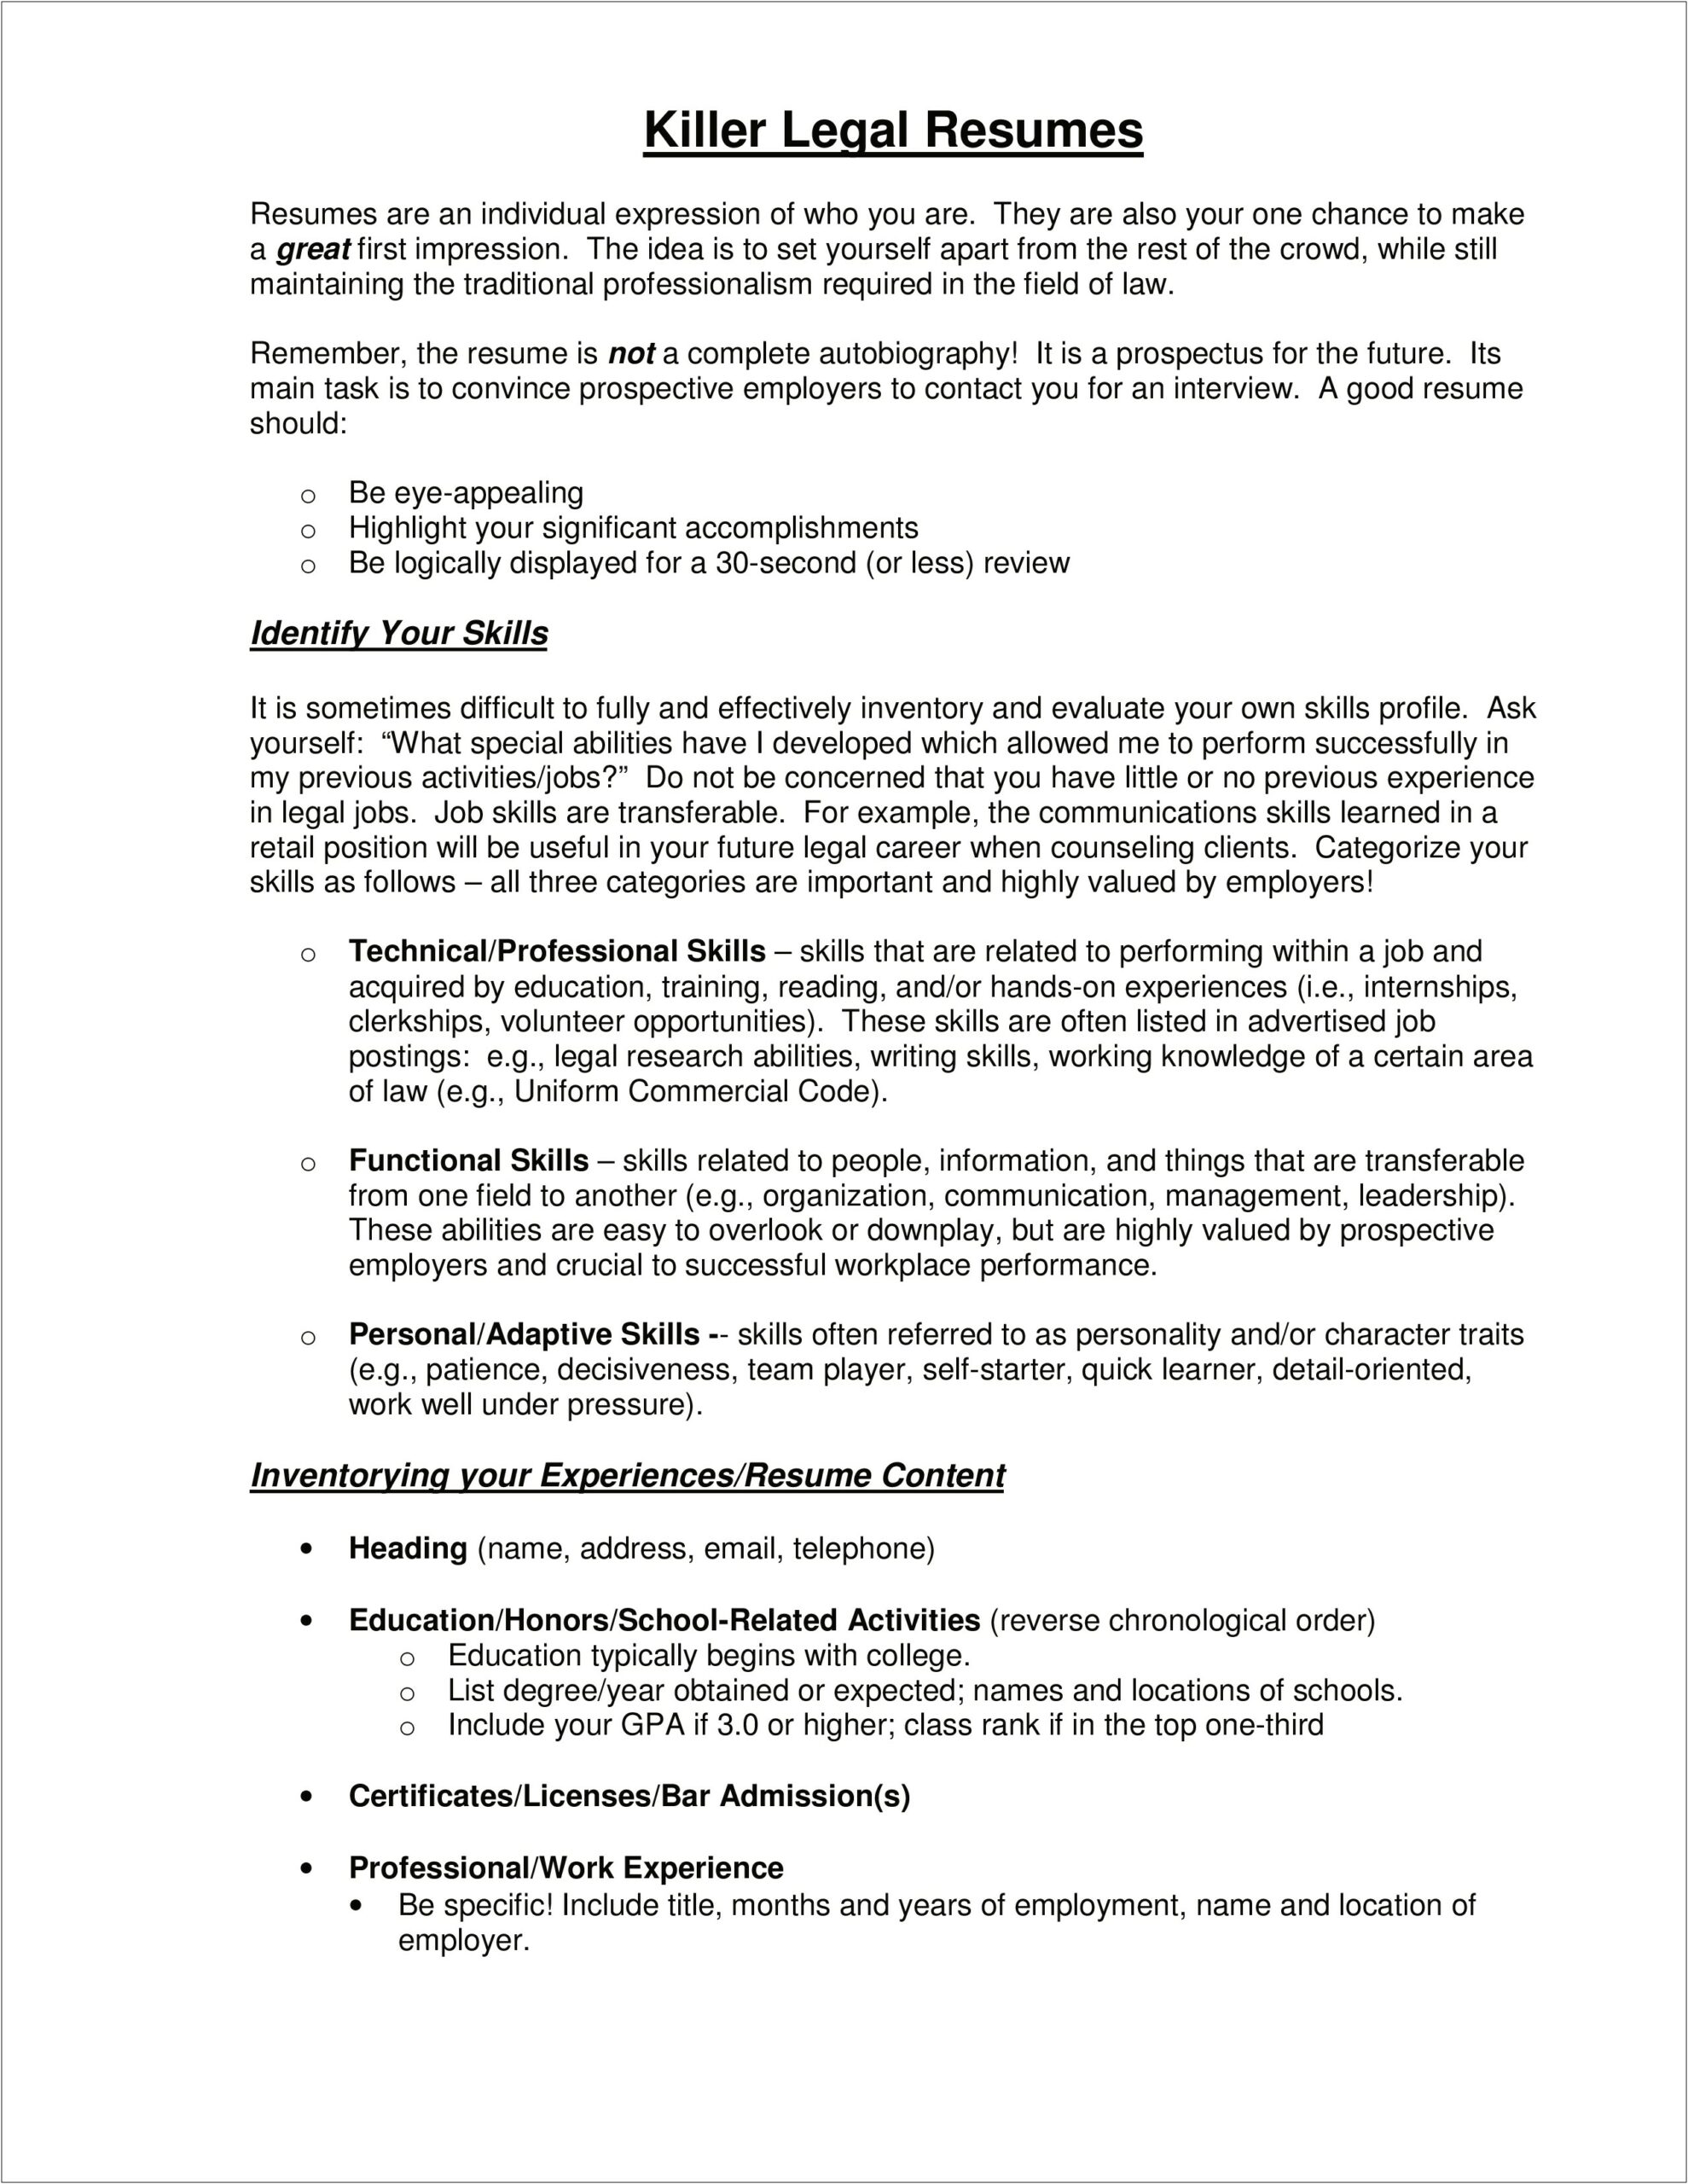 Sample Of Personal Traits In Resume